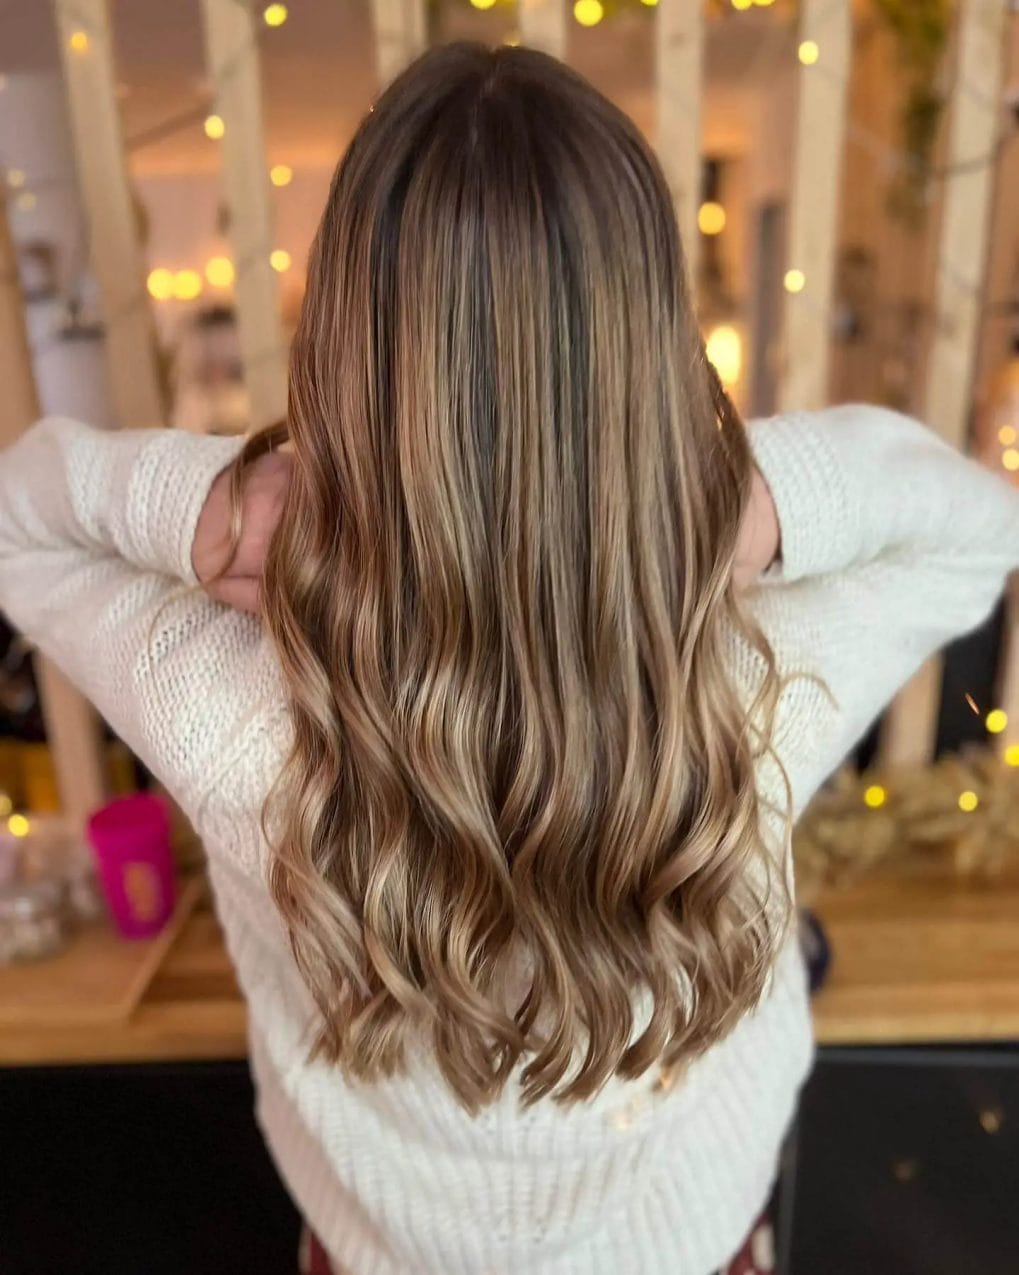 Smooth gradient from rich brown to sandy blonde, capturing the elegance of winter dusk.